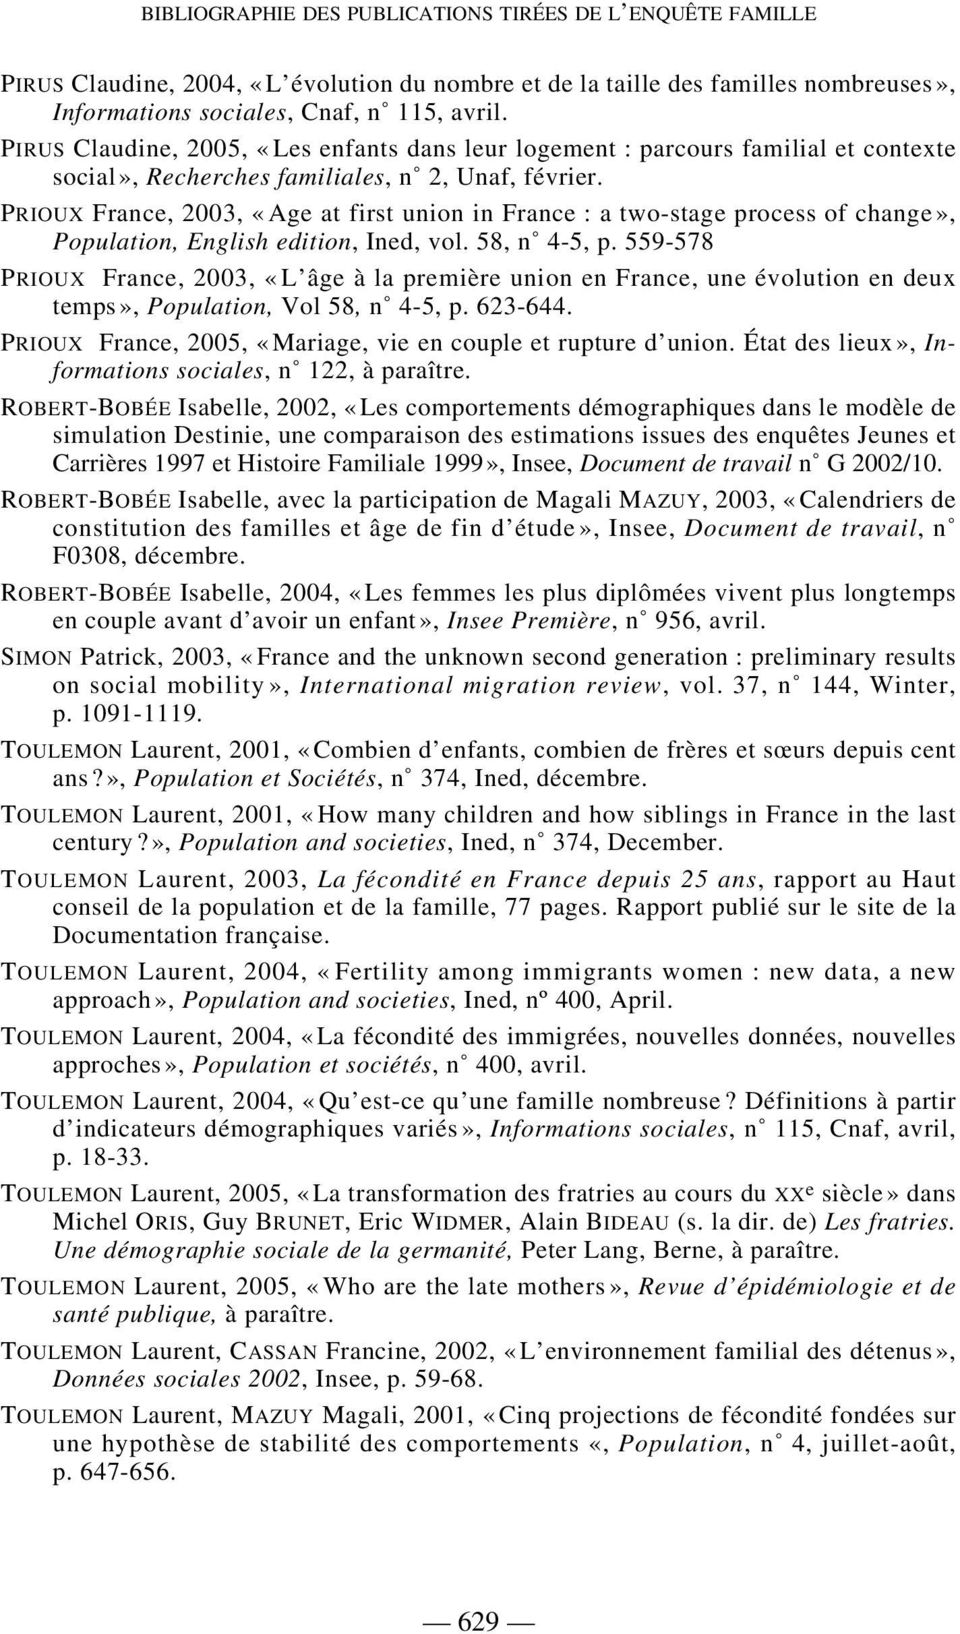 PRIOUX France, 2003, «Age at first union in France : a two-stage process of change», Population, English edition, Ined, vol. 58, n 4-5, p.